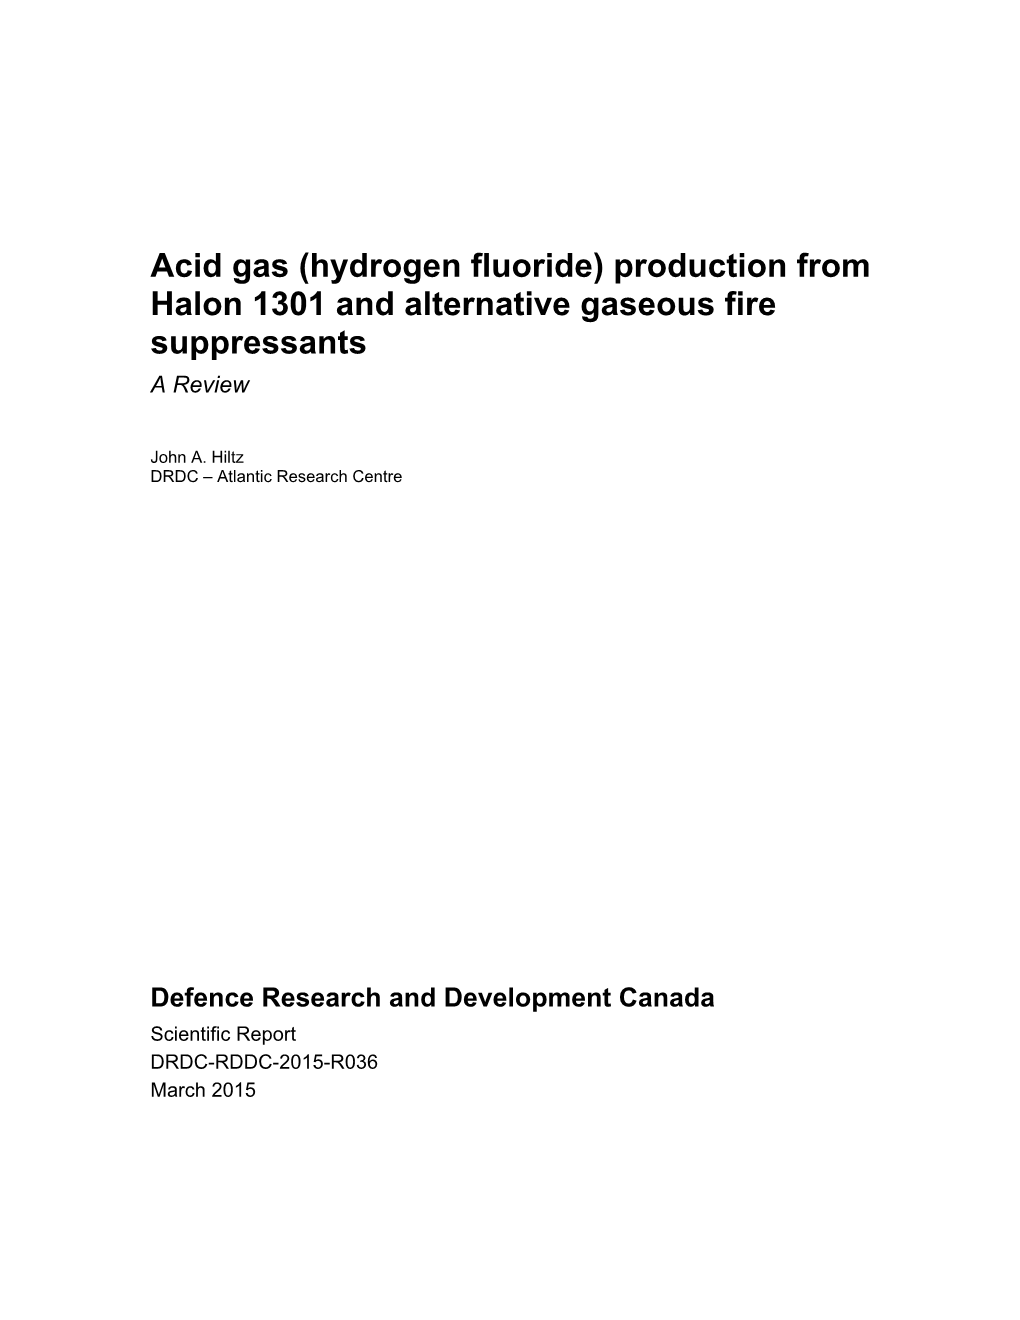 Hydrogen Fluoride) Production from Halon 1301 and Alternative Gaseous Fire Suppressants a Review